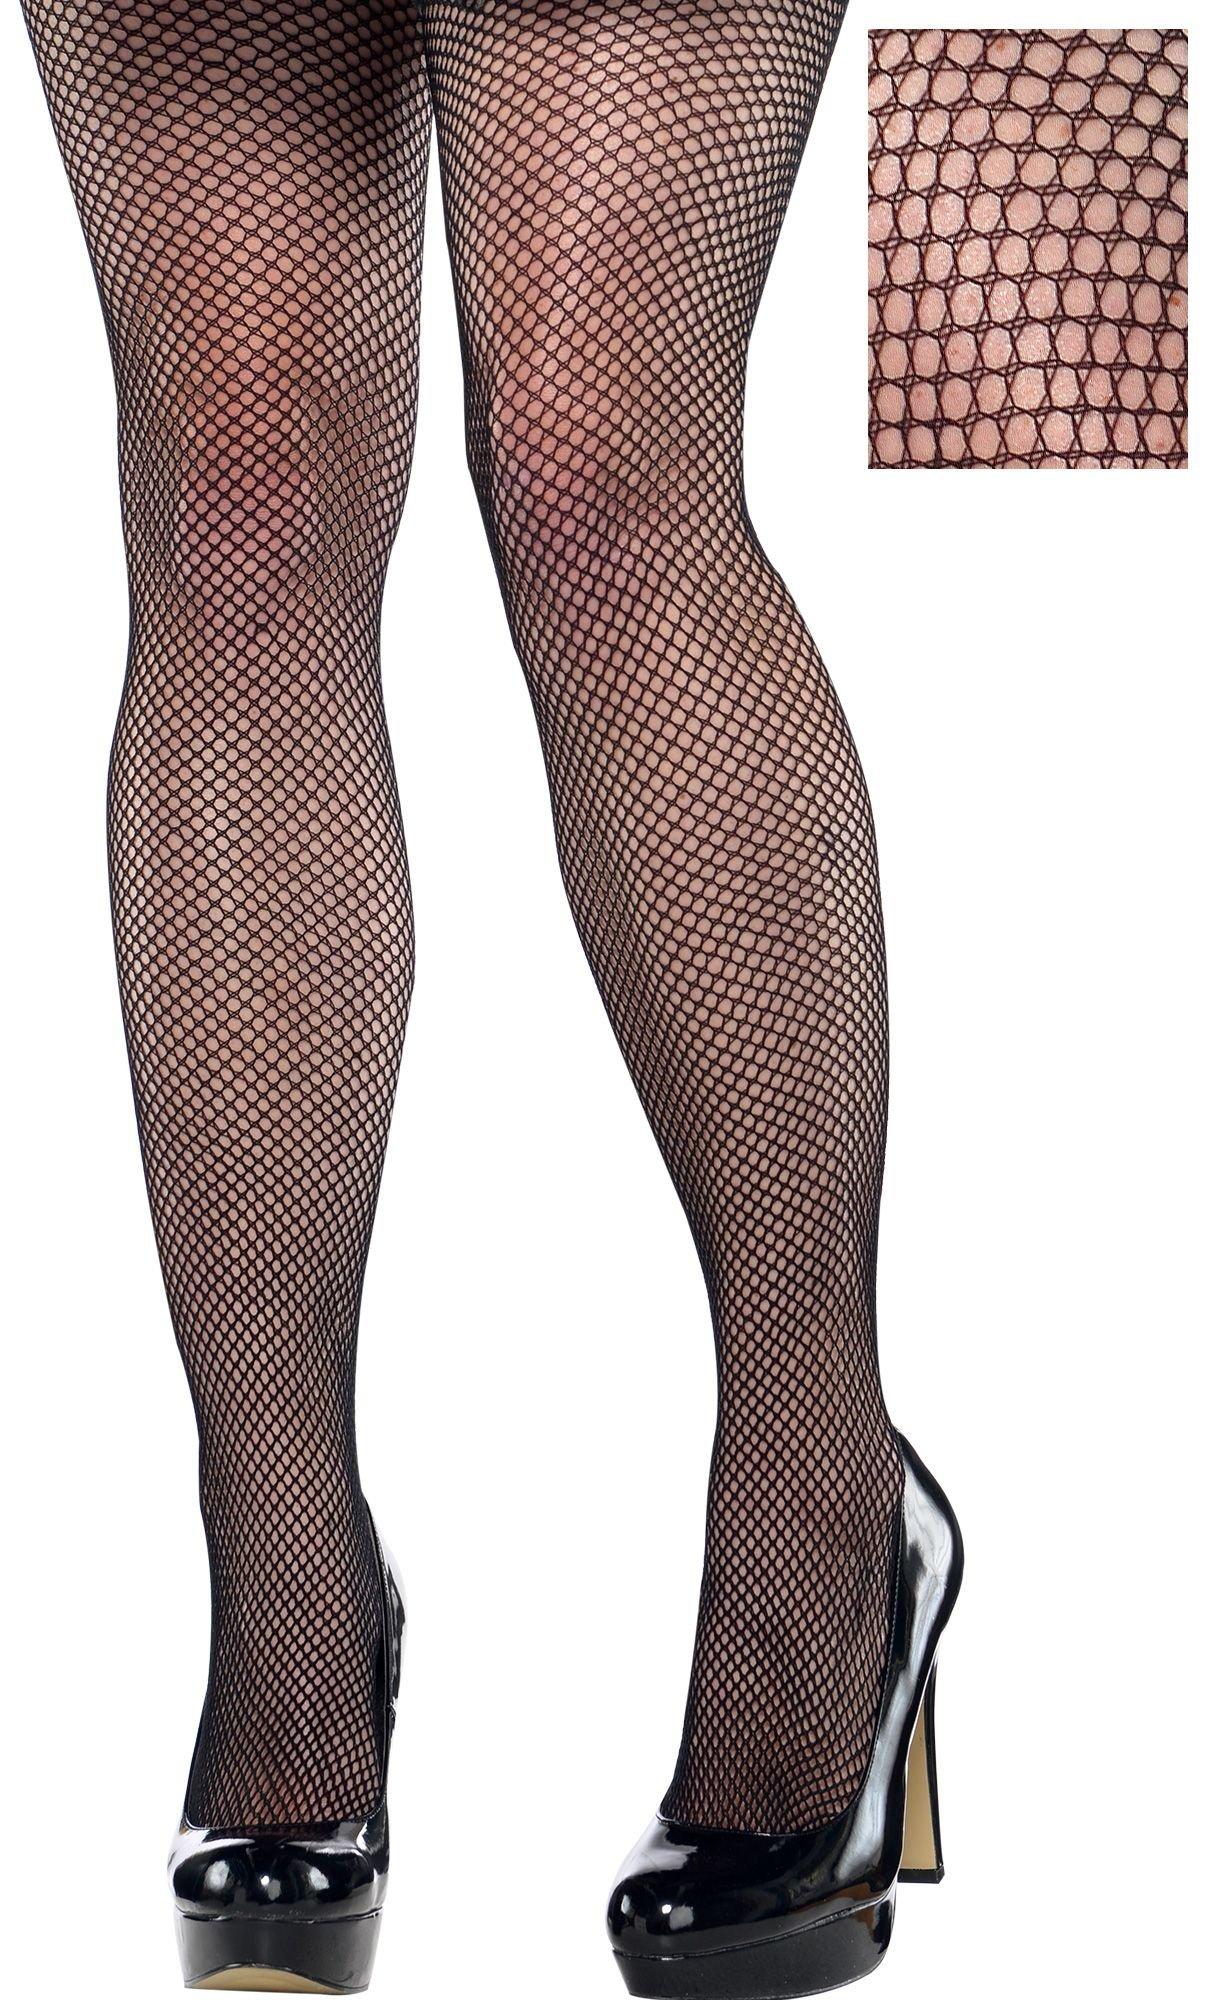 Adult Wide Diamond Fishnet Stocking Tights, Black, One Size